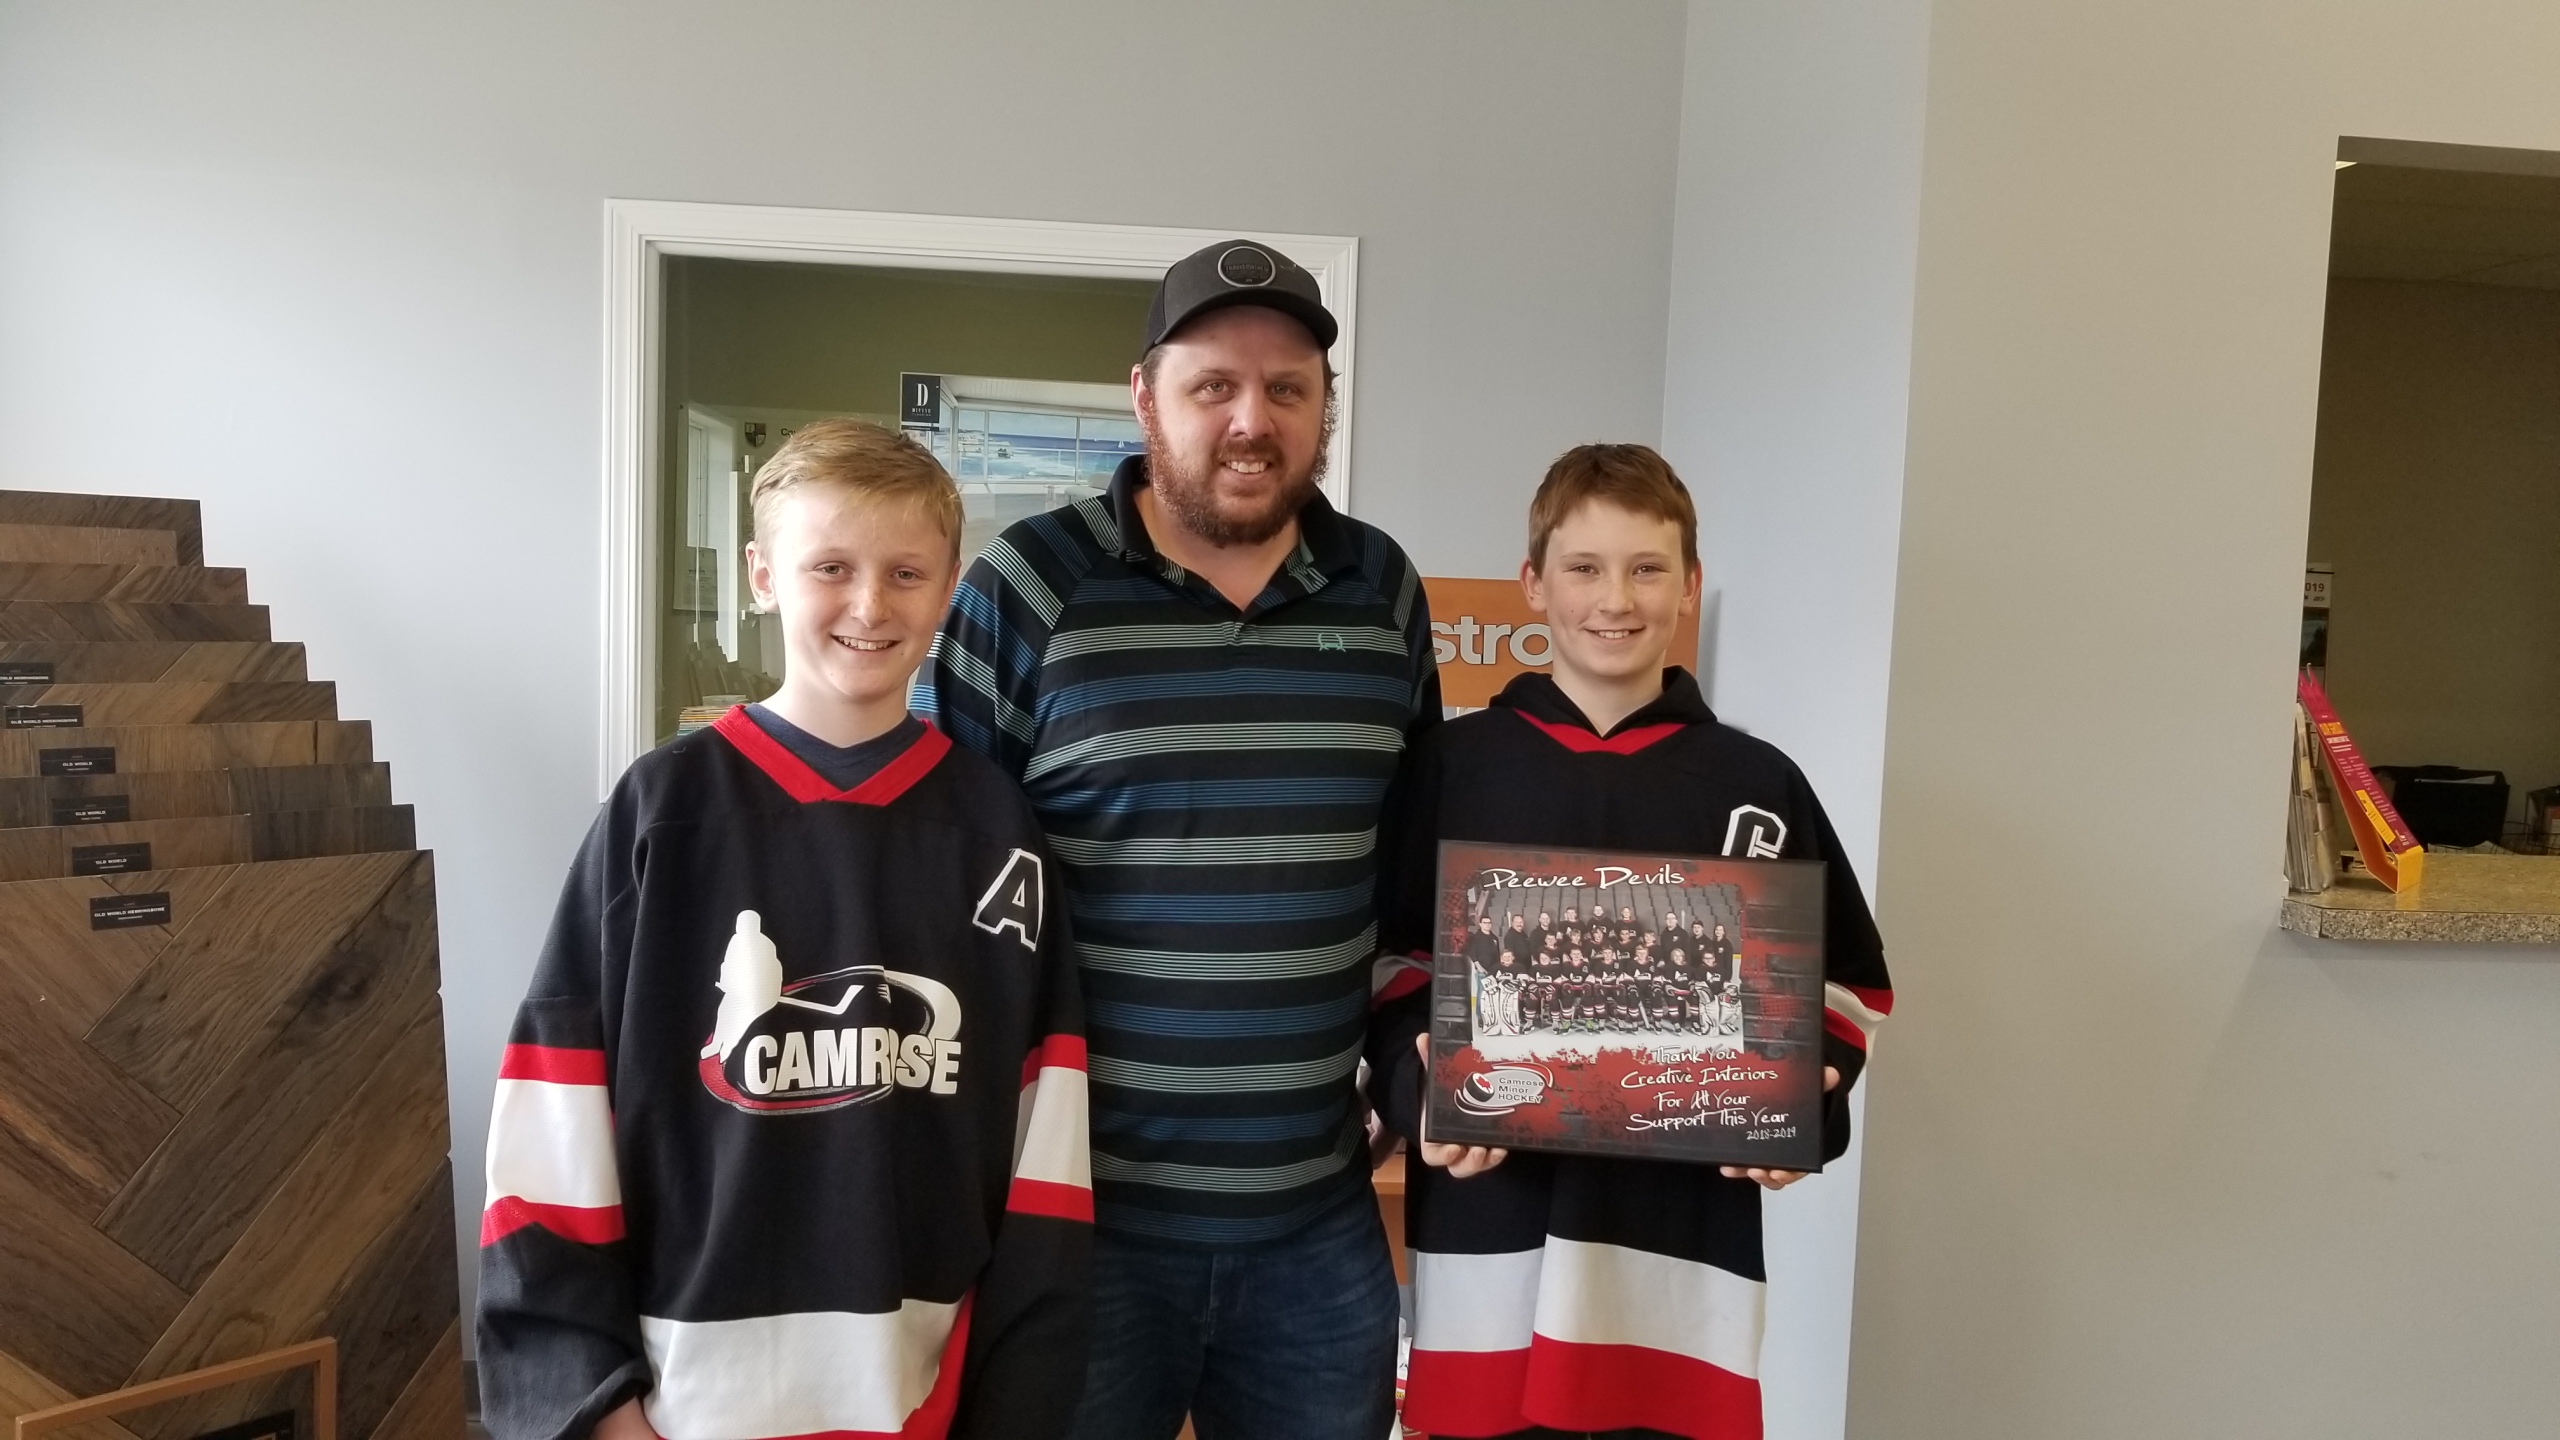 Thank you to Creative Interiors for sponsoring the Peewee Devils